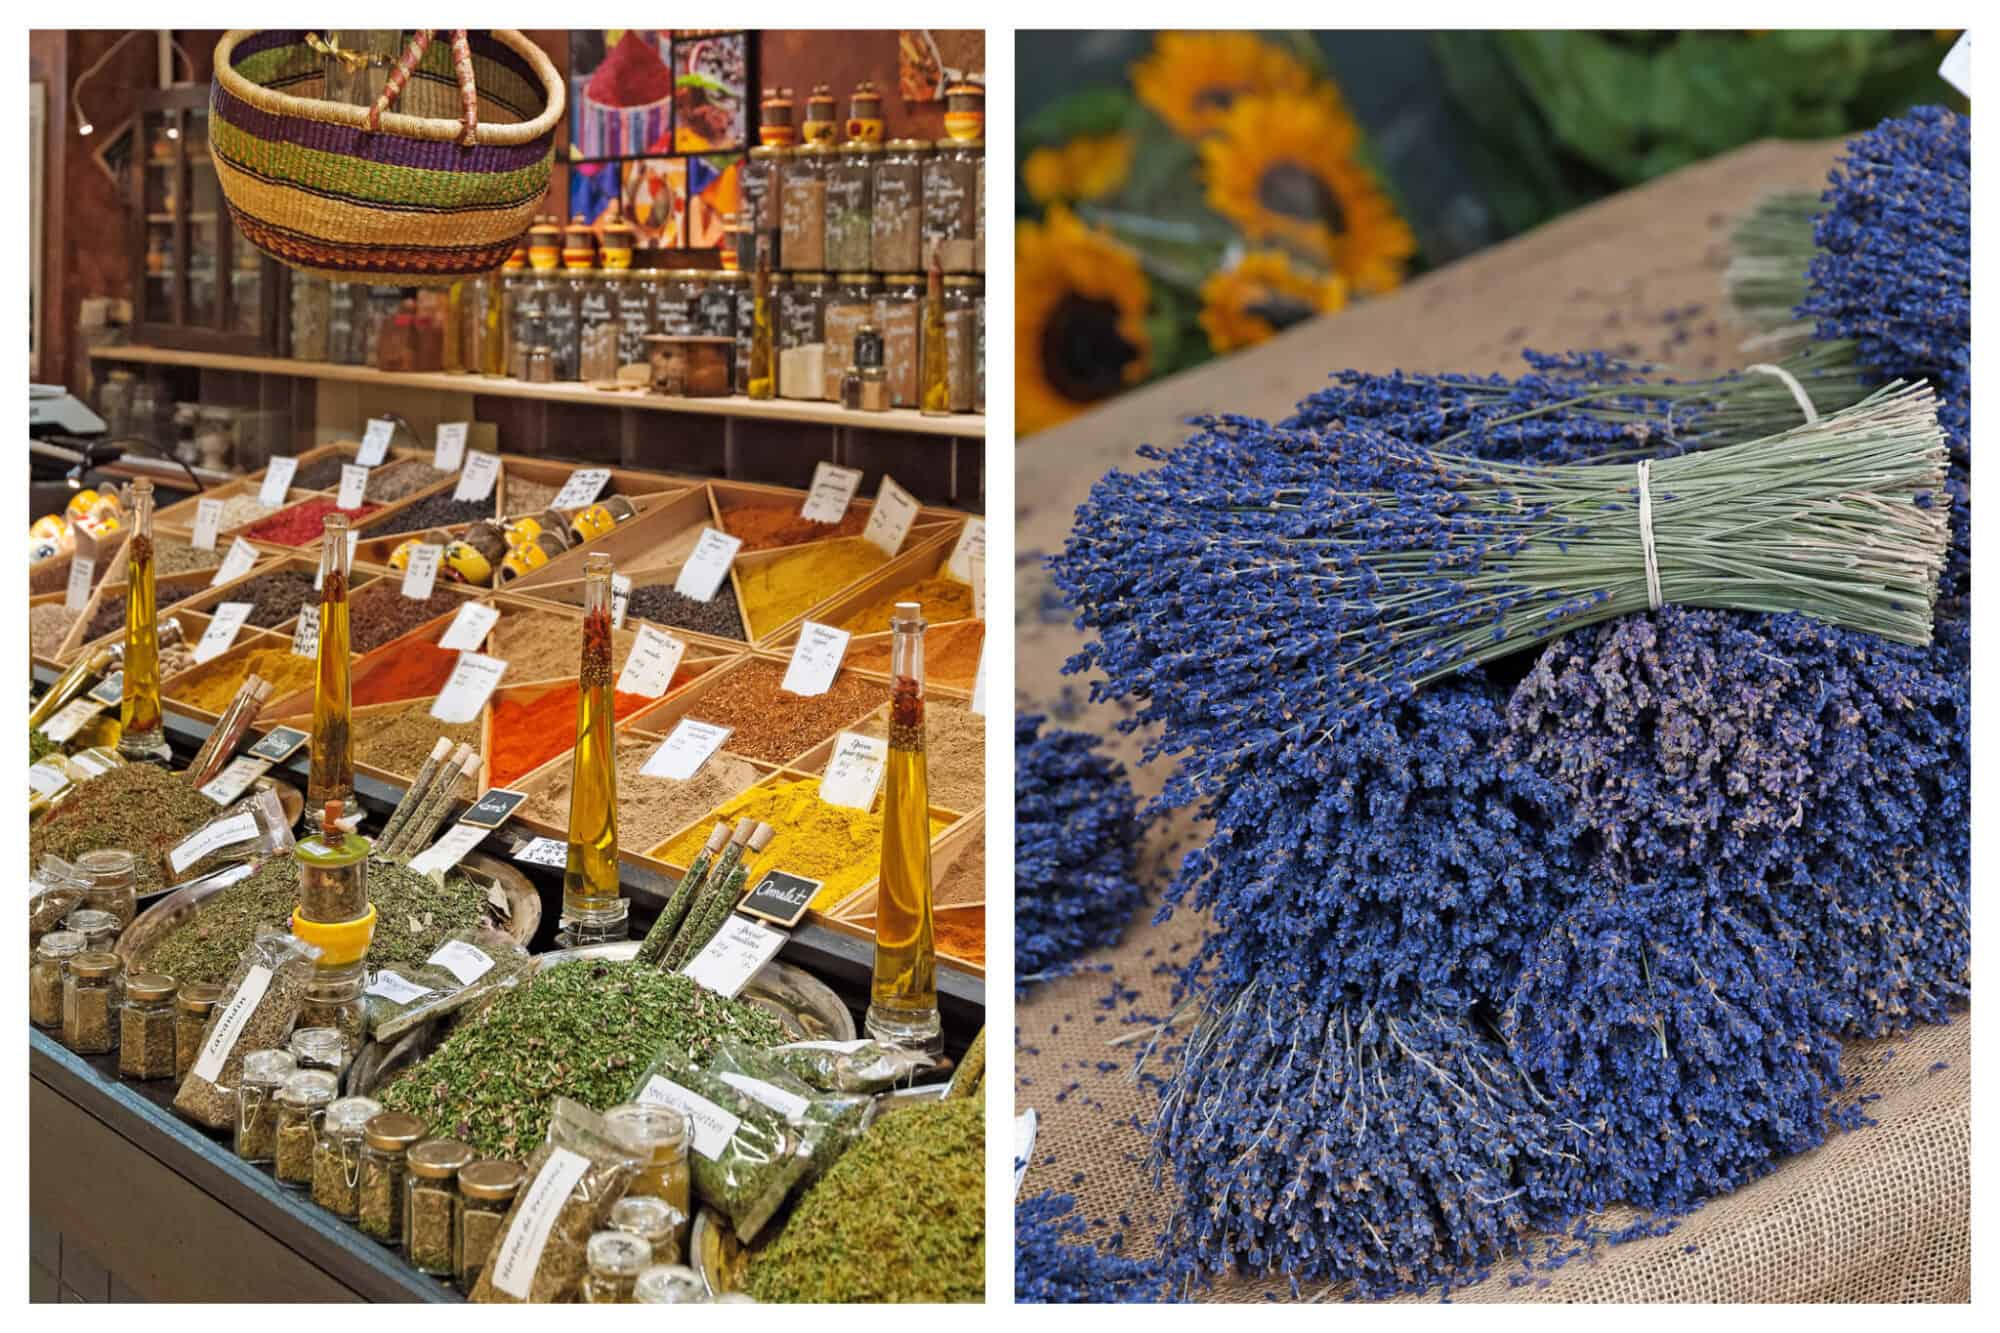 Left: various spices, herbs and oils at a market. Right: bunches of lavender with sunflowers in the background at a market.